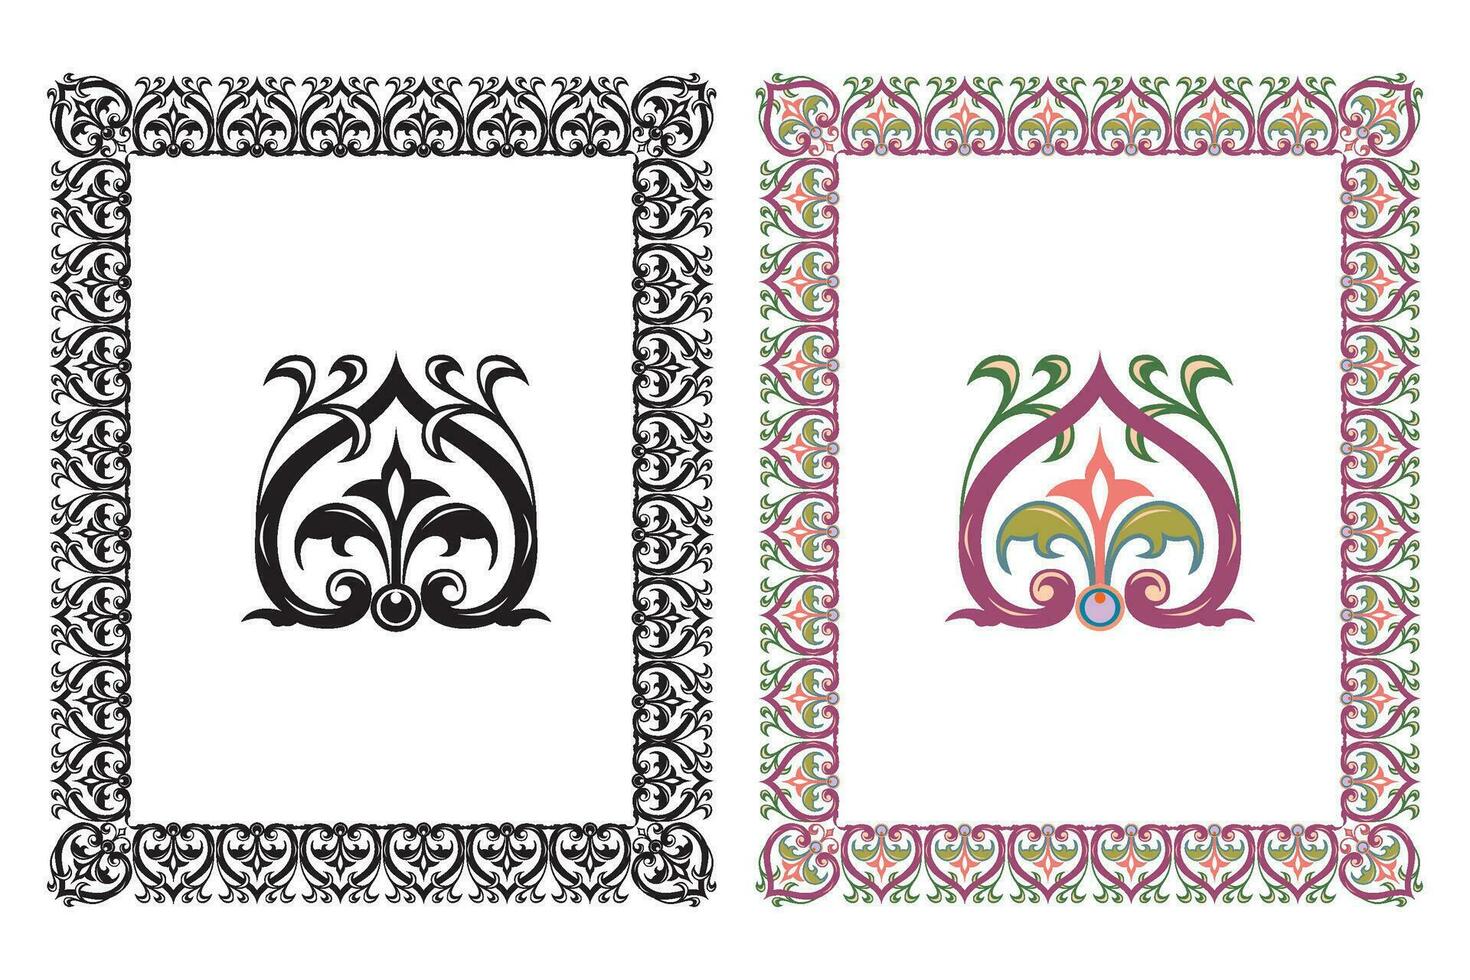 Vintage traditional realistic frames set on white background isolated vector illustration